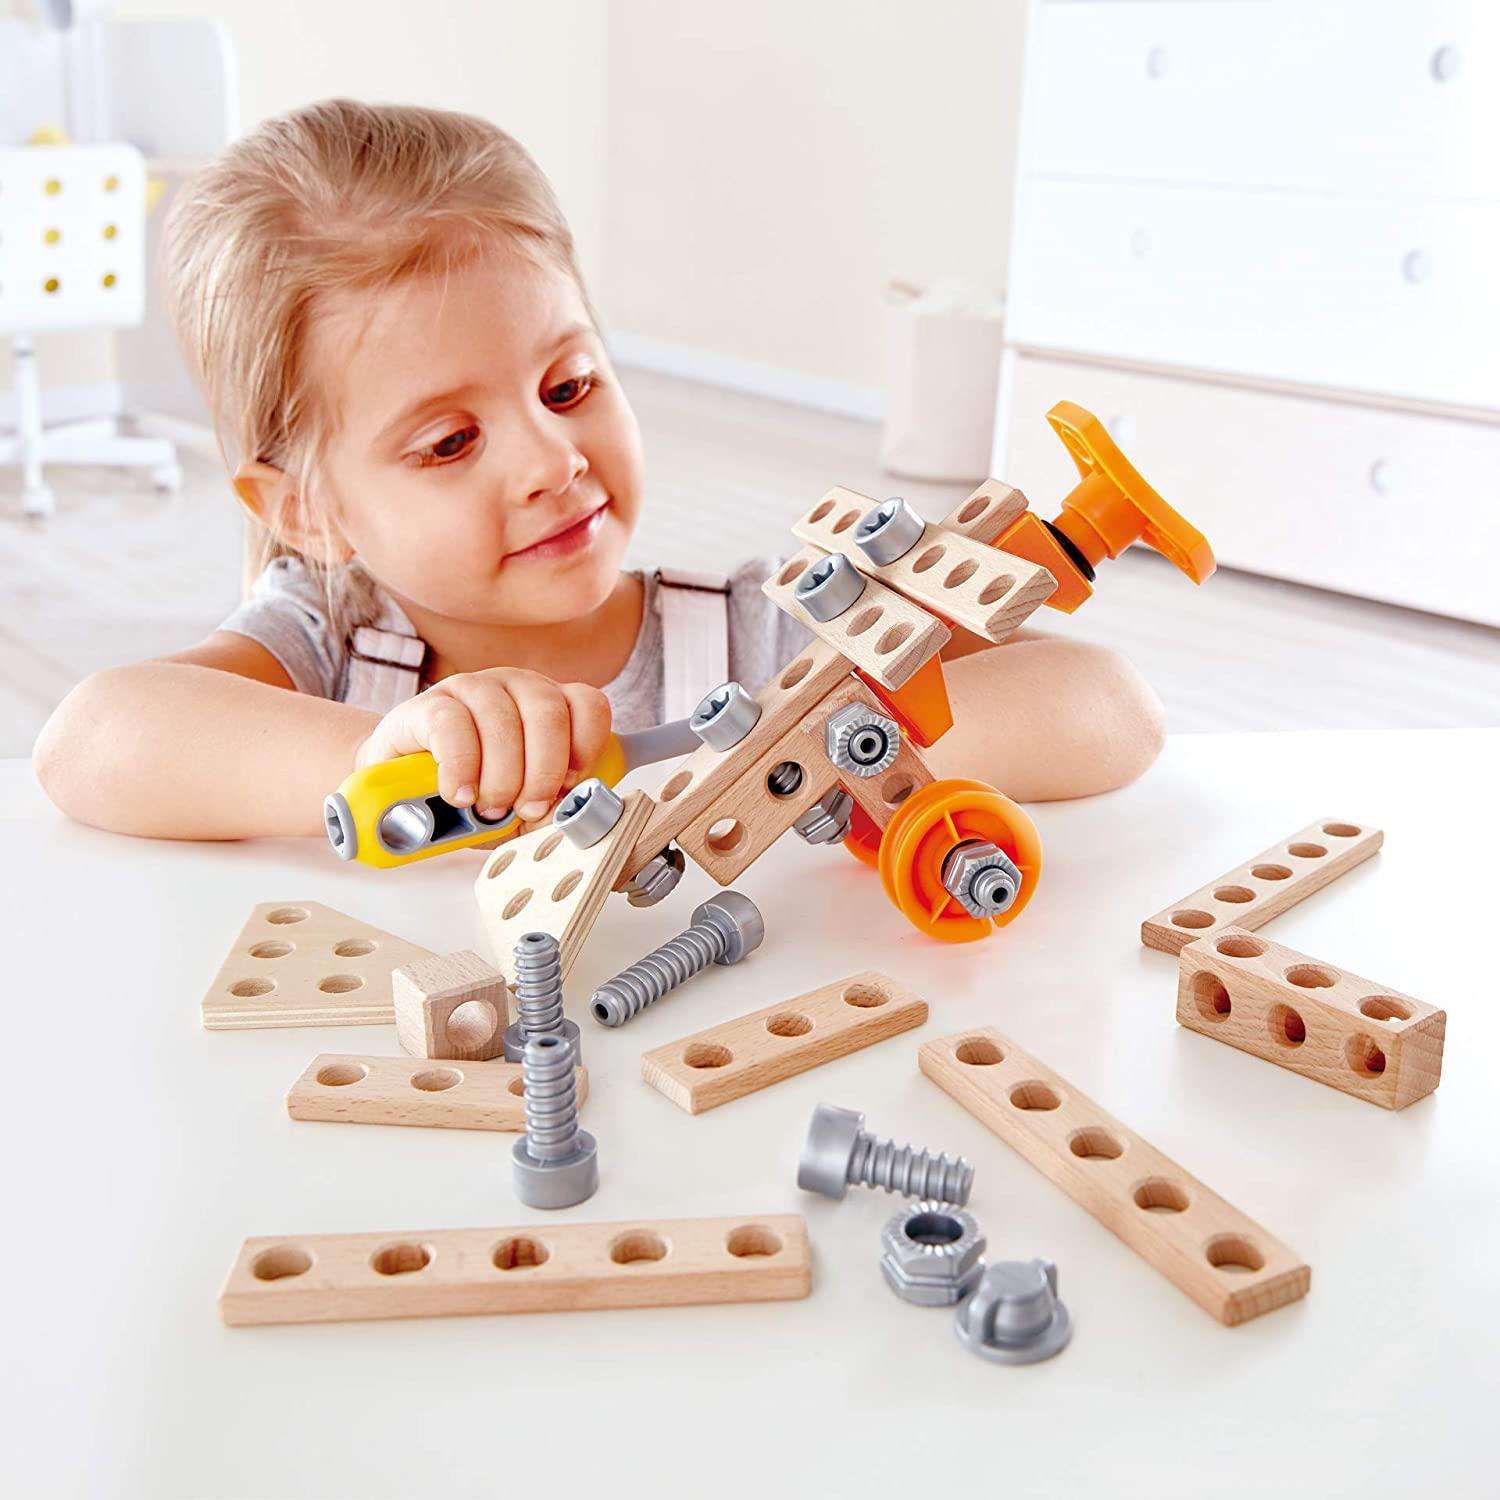 Young child playing with Junior Inventor kit